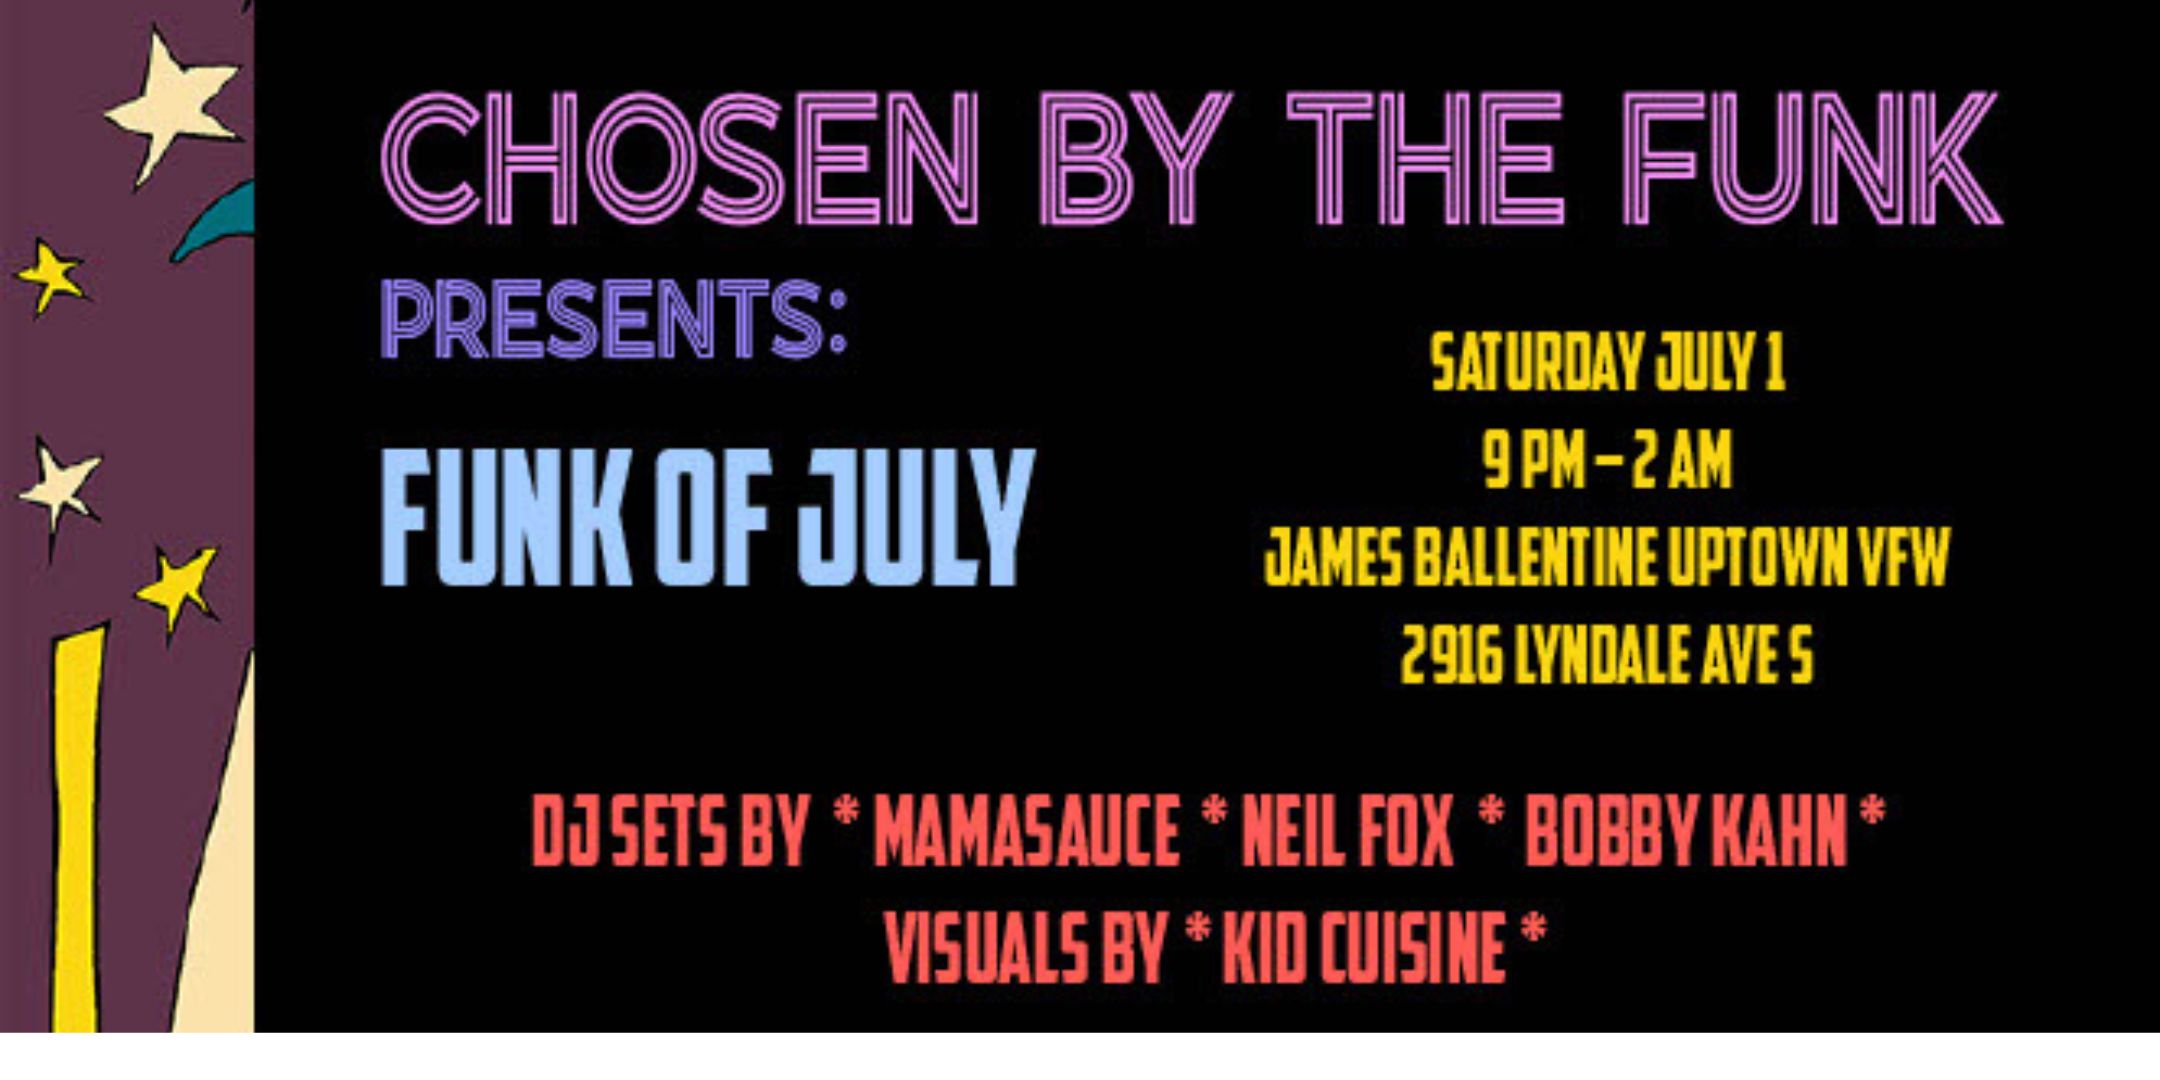 Chosen By The Funk Presents: Funk Of July DJ sets by MamaSauce Neil Fox Bobby Kahn Visuals by Kid Cuisine Friday, July 1 James Ballentine "Uptown" VFW Post 246 Doors 9:00pm :: Music 10:00pm :: 21+ GA $5 ADV / $10 DOS NO REFUNDS